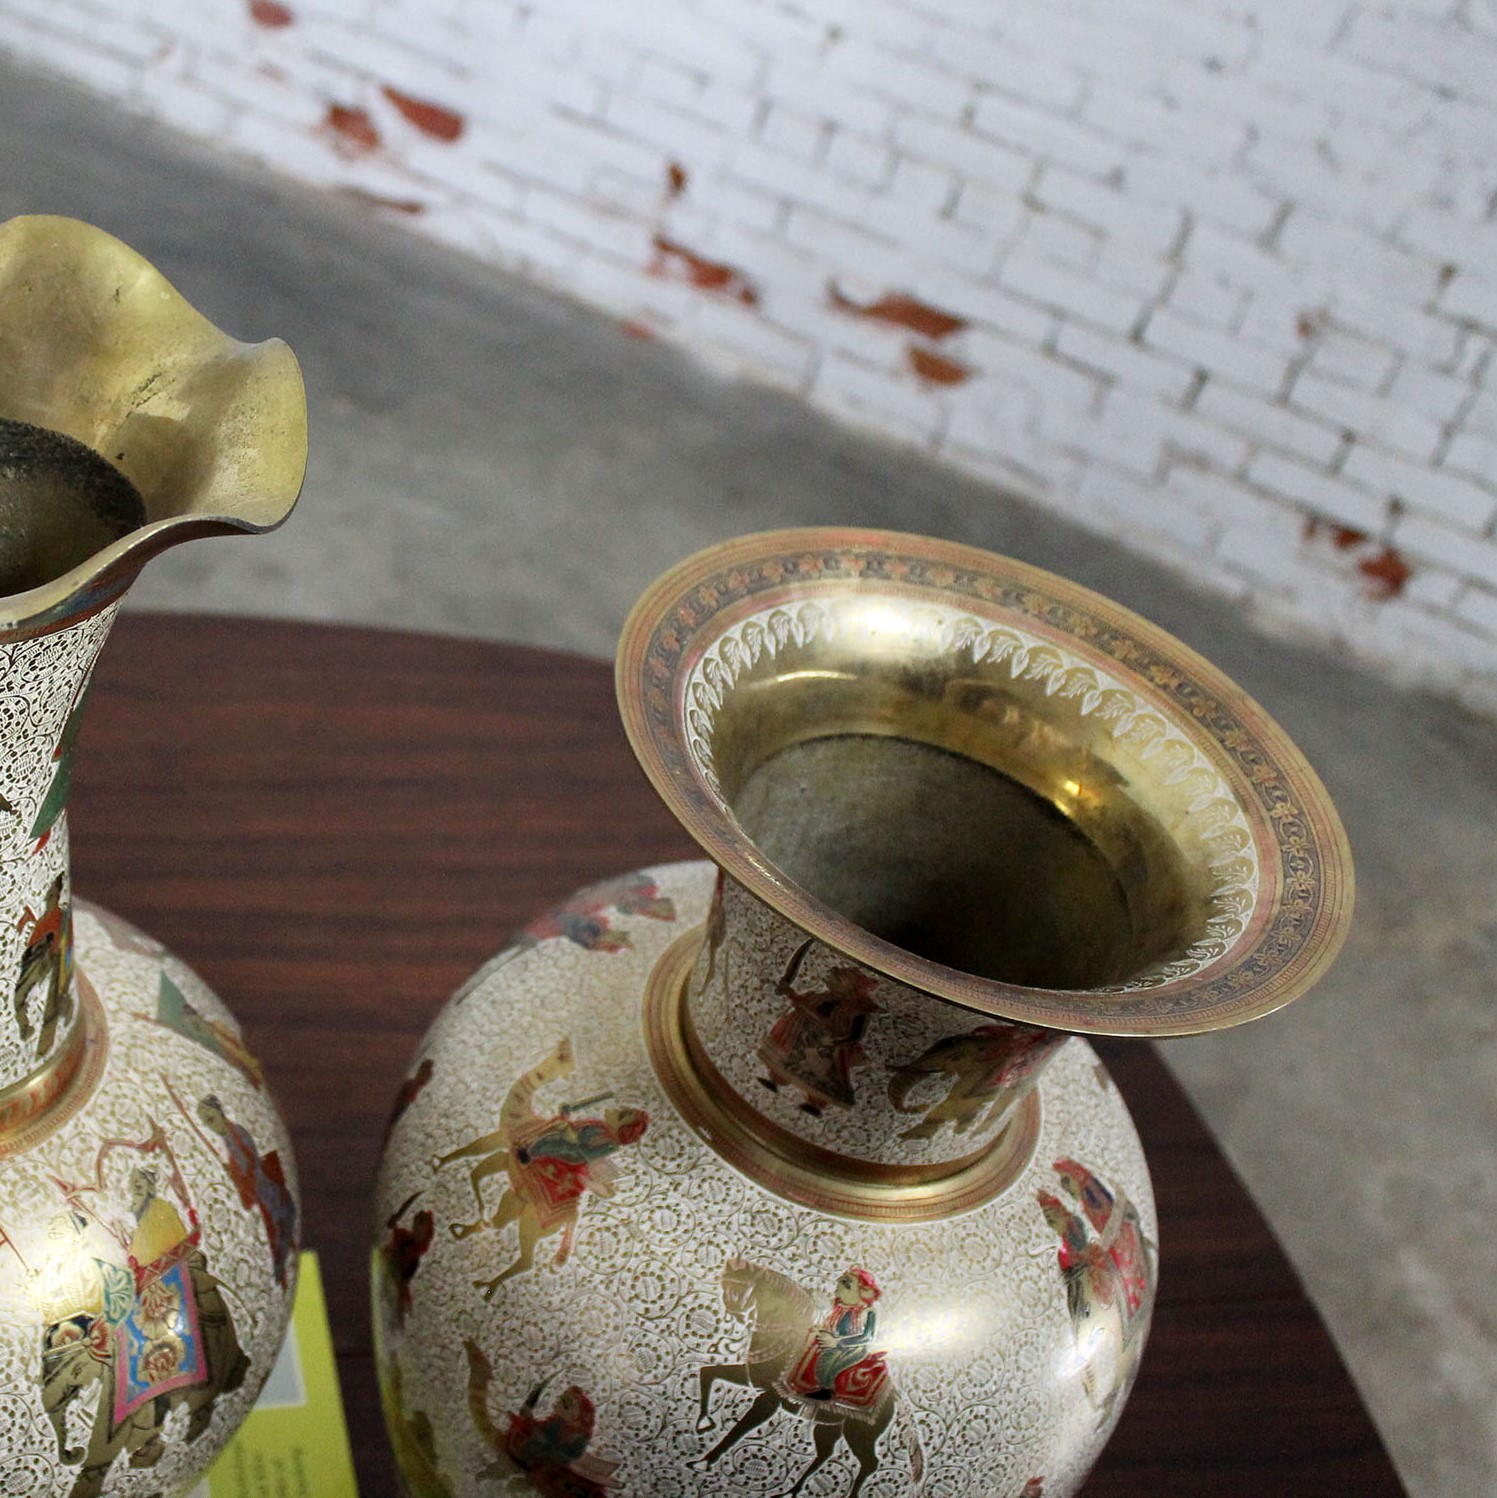 Unmatched Pair Etched and Enameled Cast Brass Vases Kashmiri Indo Persian Monumental Size